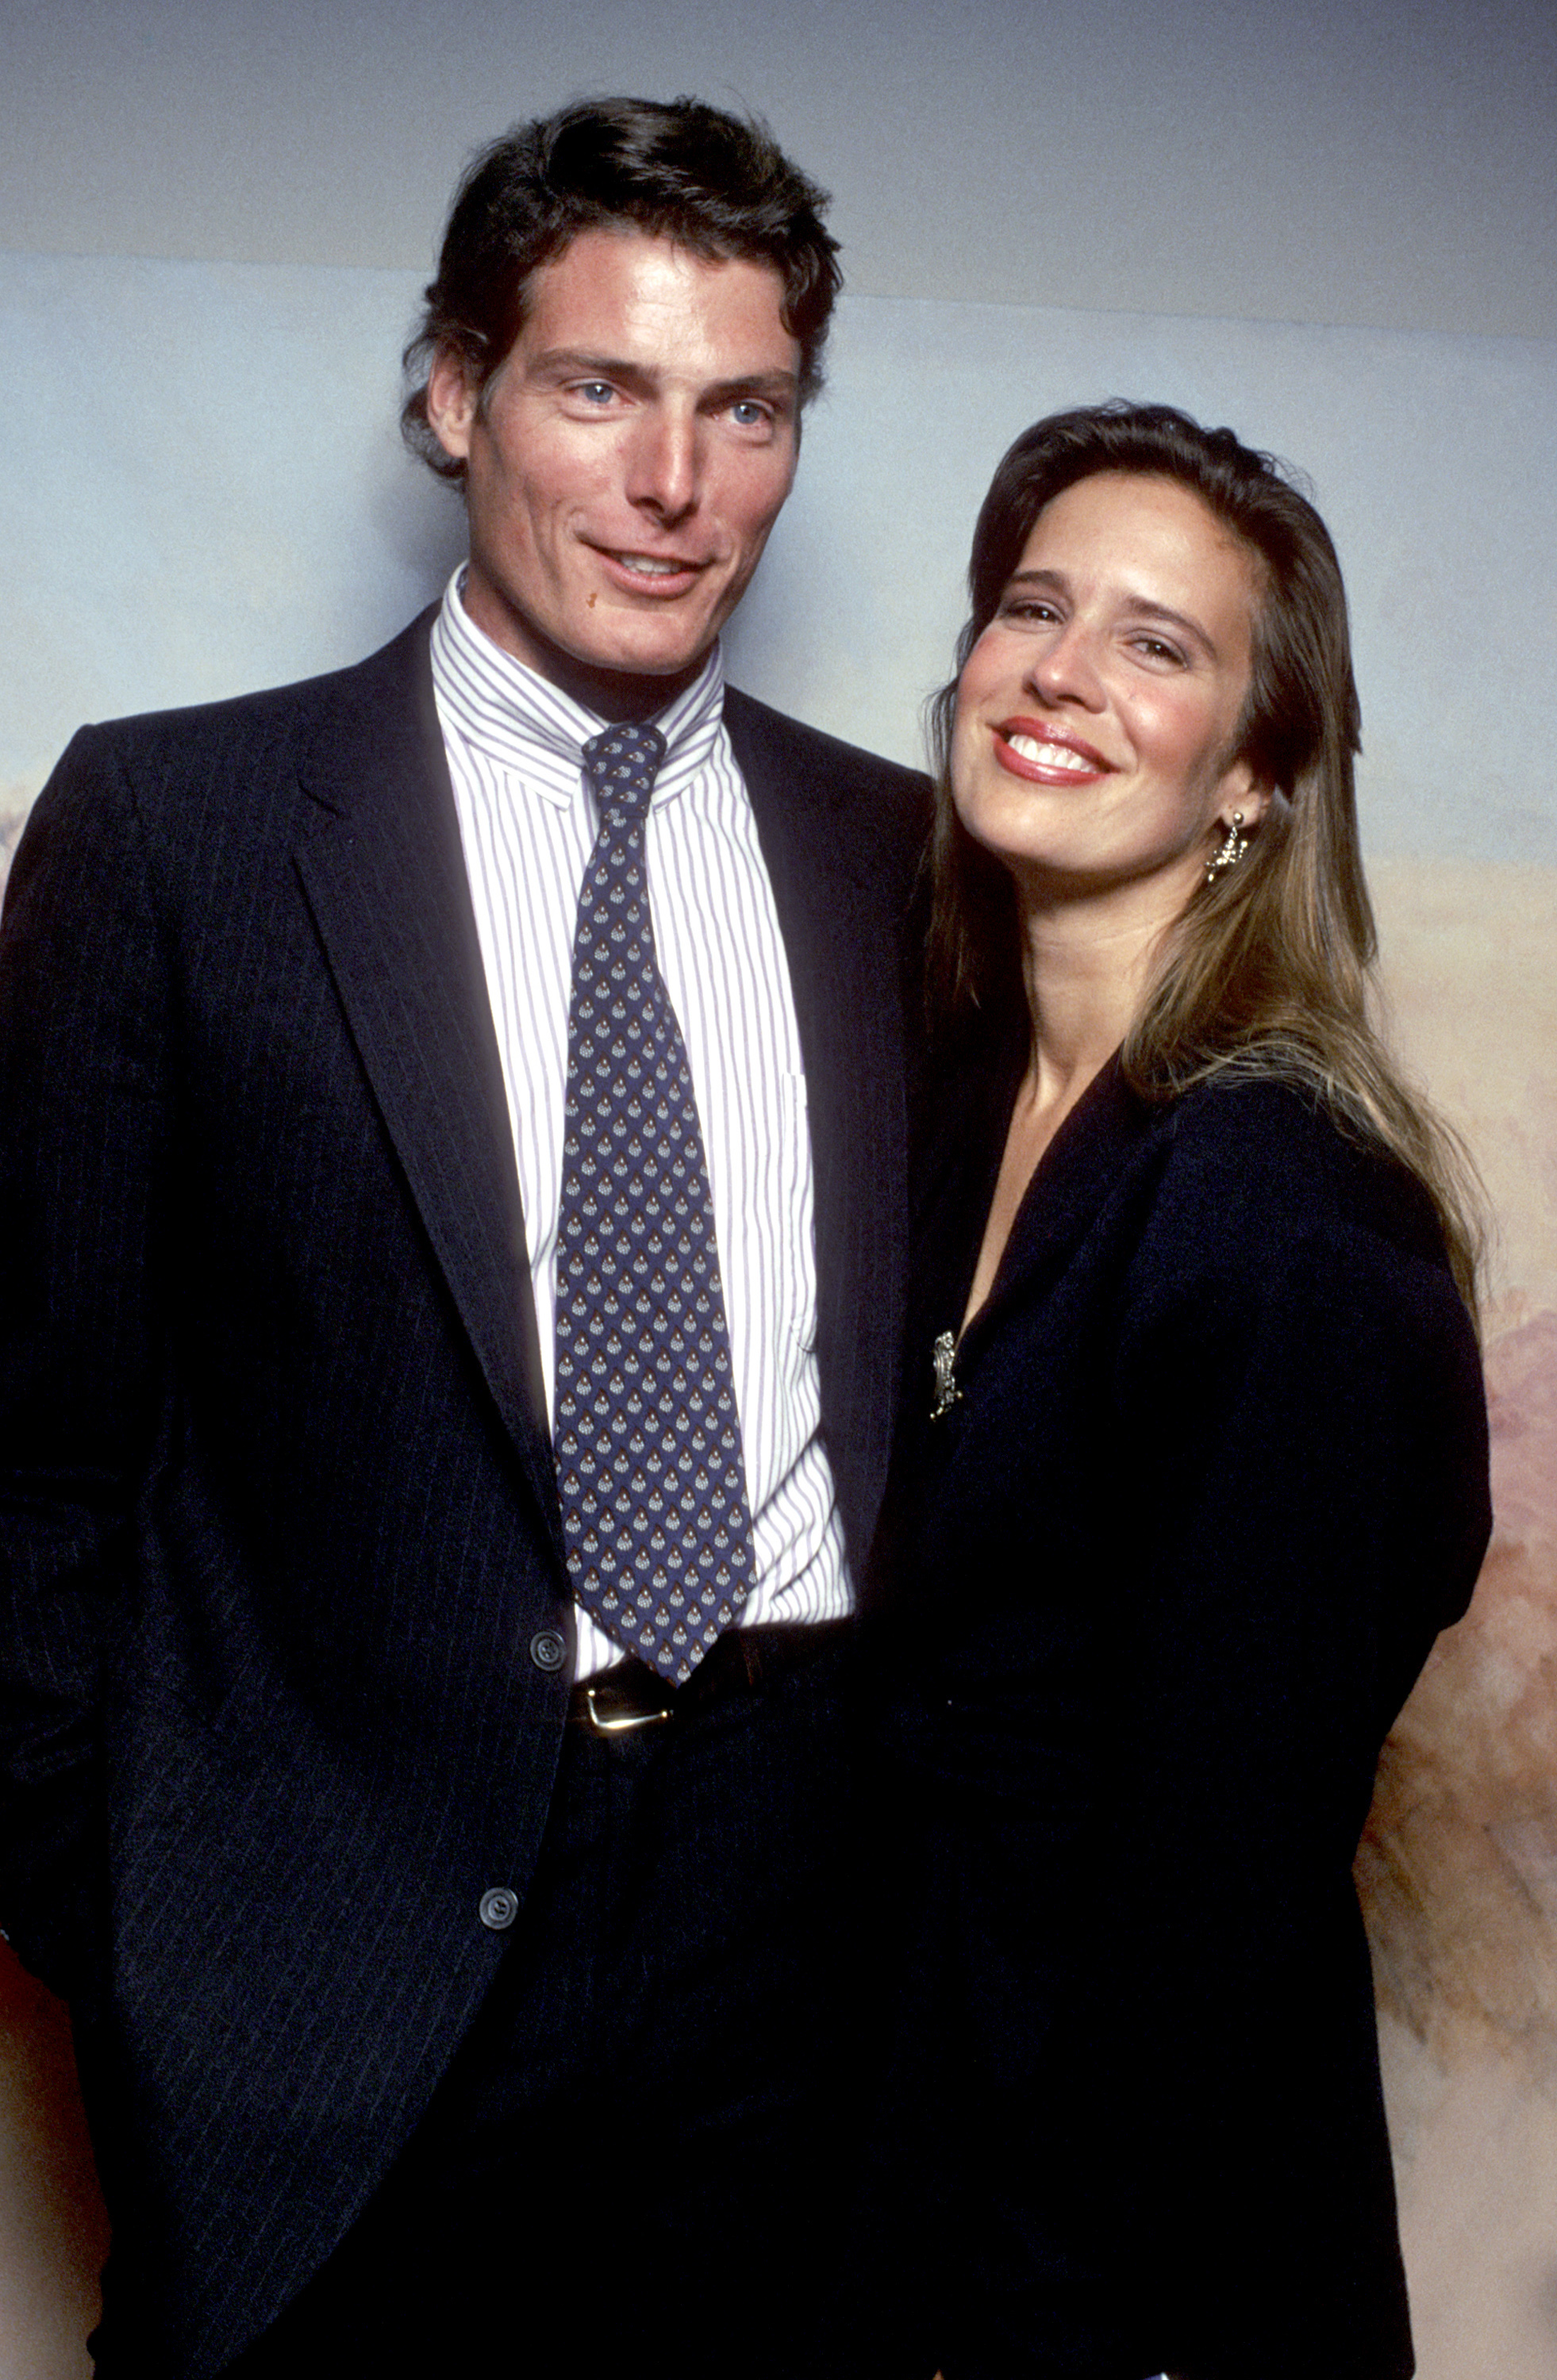 Christopher and Dana Reeve at the "Orpheus Descending" Play Opening in New York in 1989 | Source: Getty Images